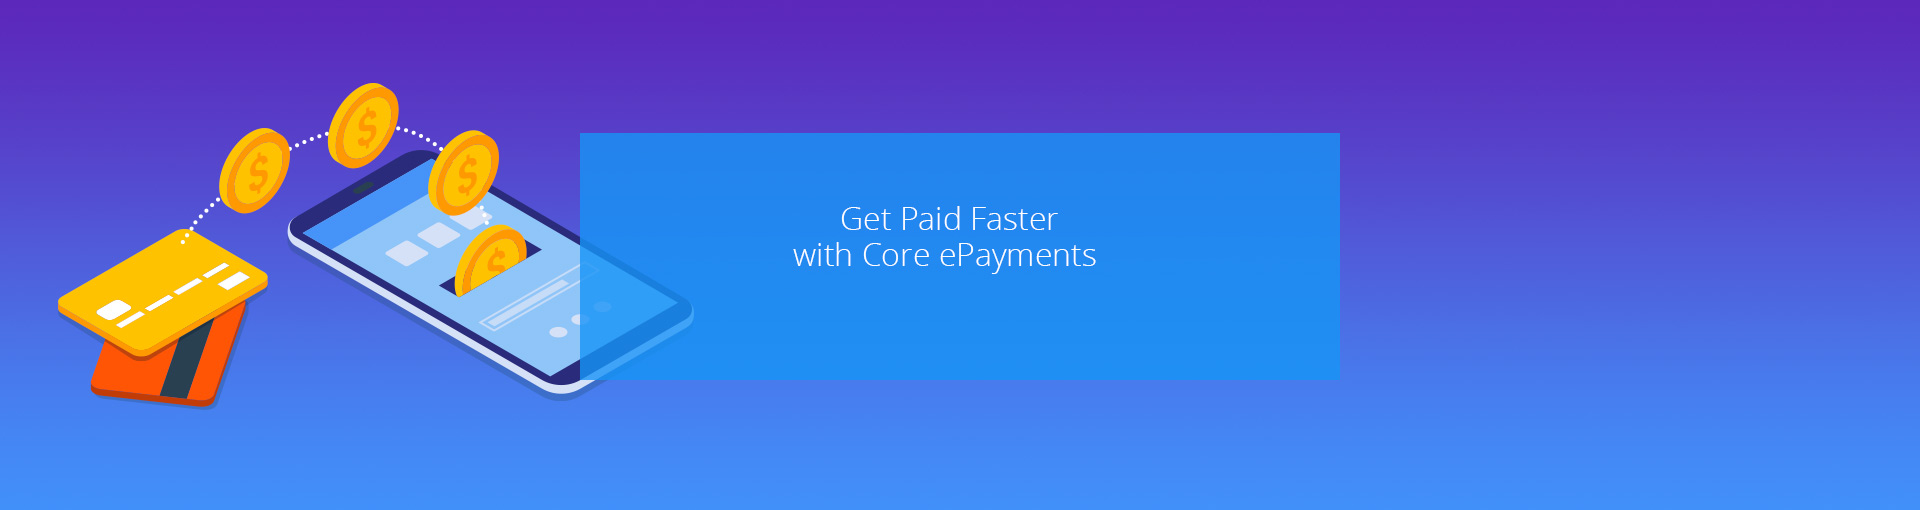 Get Paid Faster with CORE ePayments Featured Image